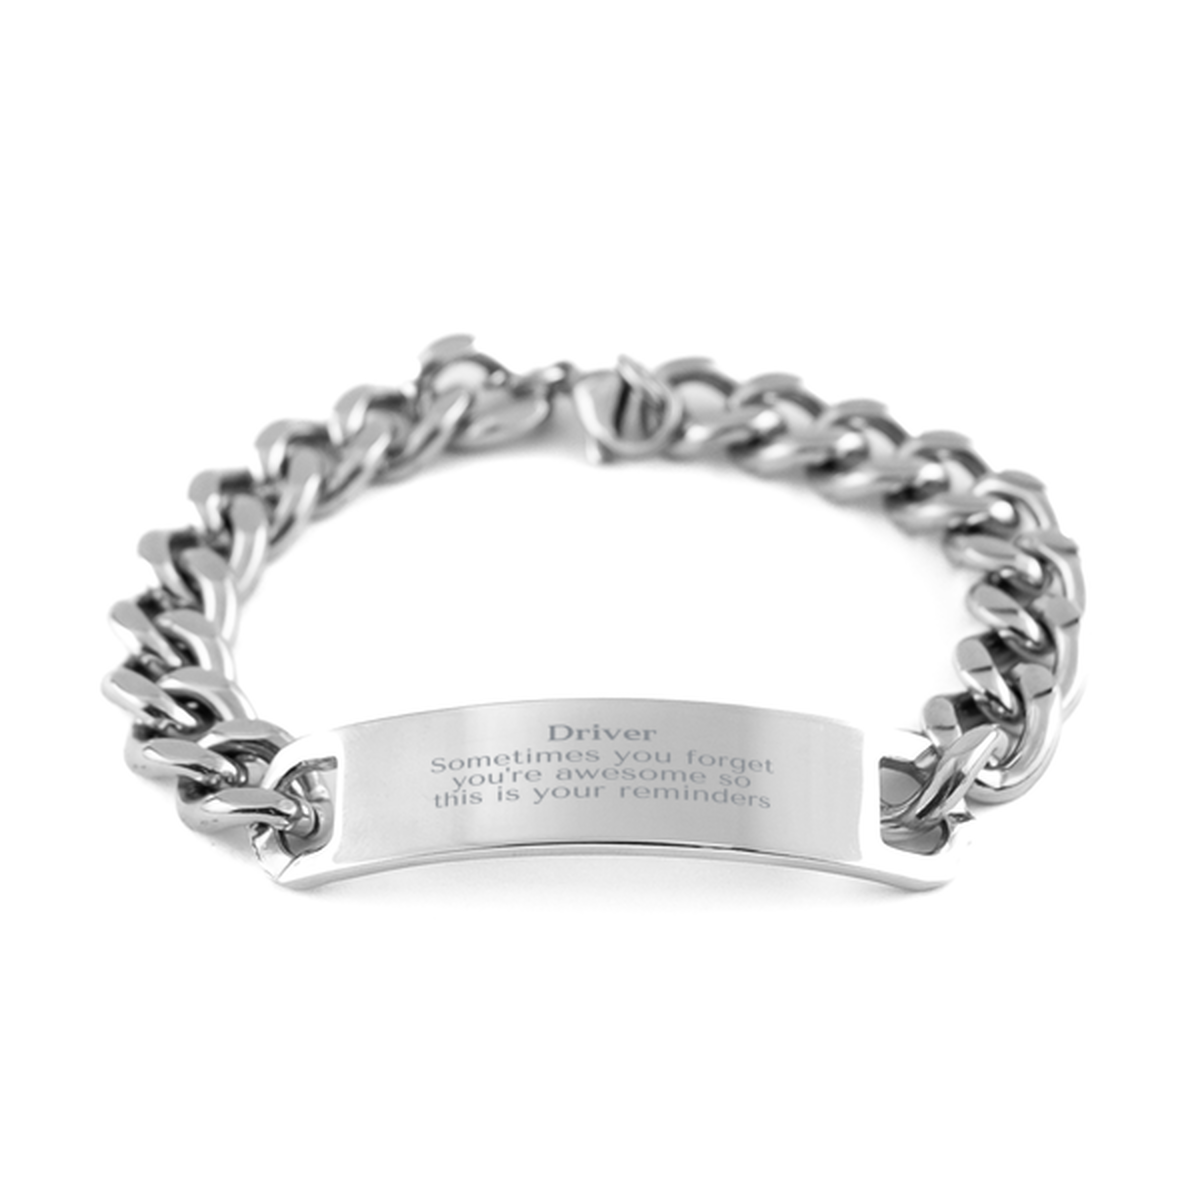 Sentimental Driver Cuban Chain Stainless Steel Bracelet, Driver Sometimes you forget you're awesome so this is your reminders, Graduation Christmas Birthday Gifts for Driver, Men, Women, Coworkers